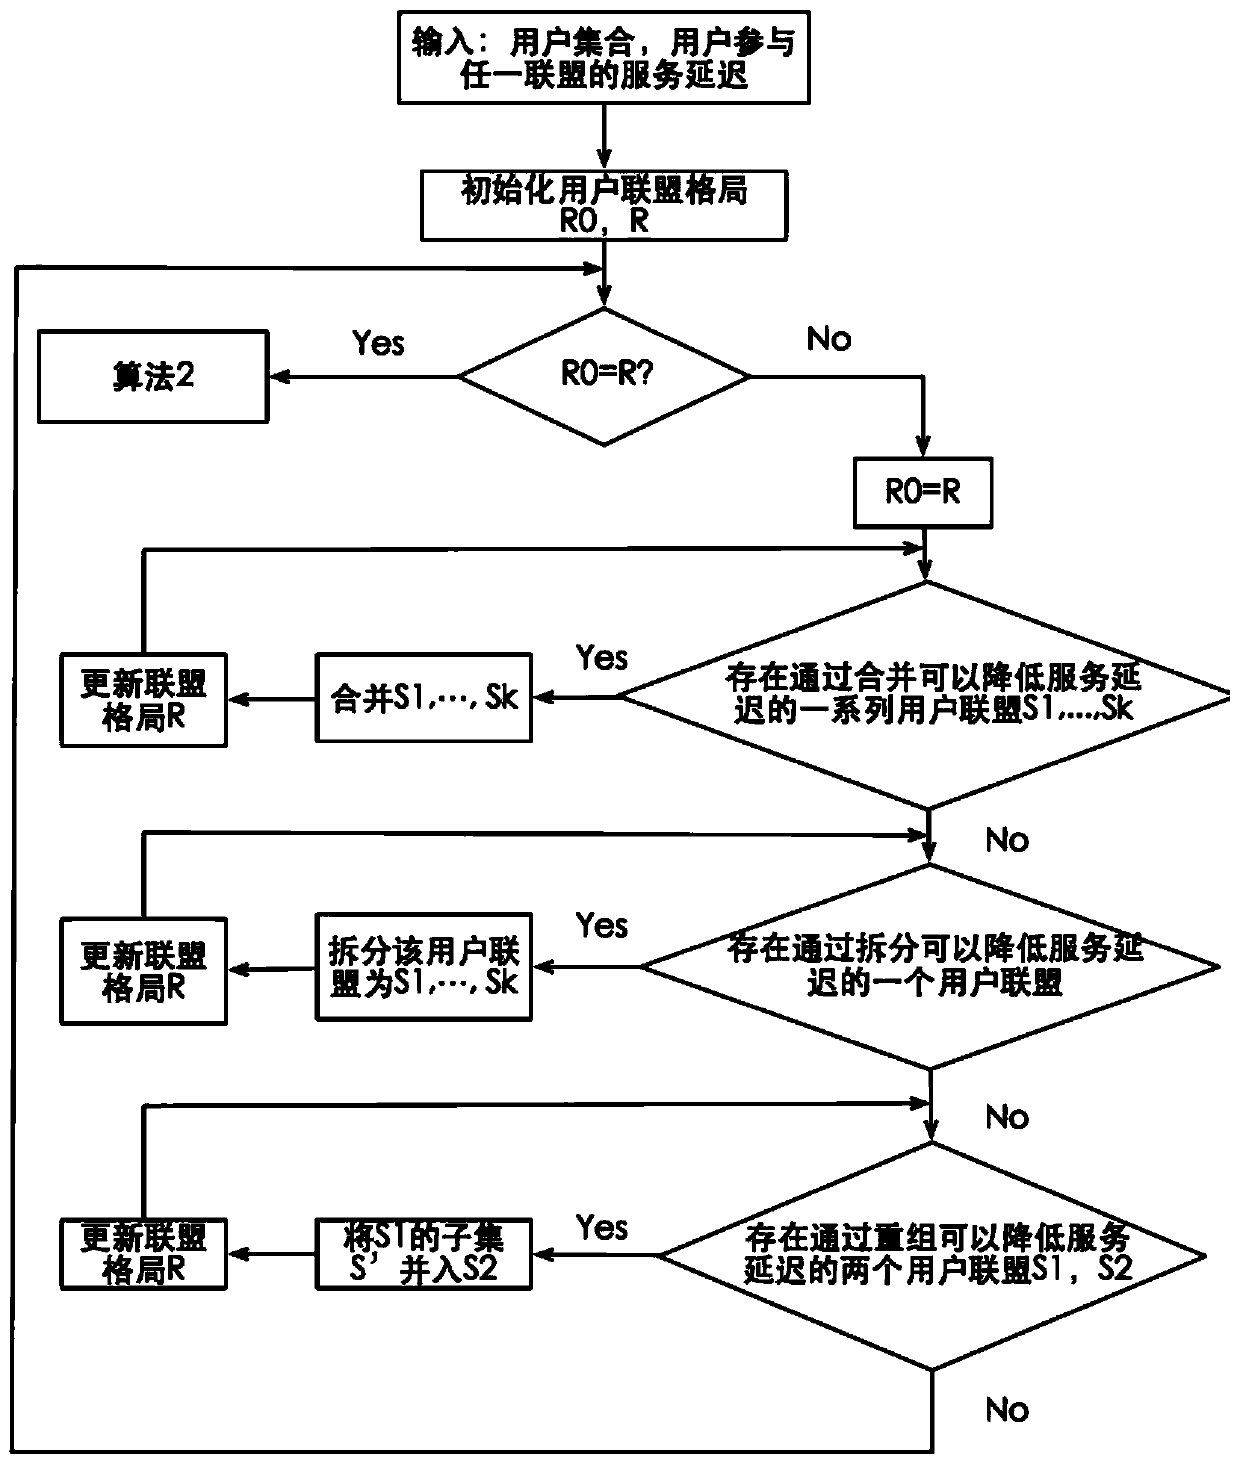 A local cache file sharing method based on mobile swarm intelligence network